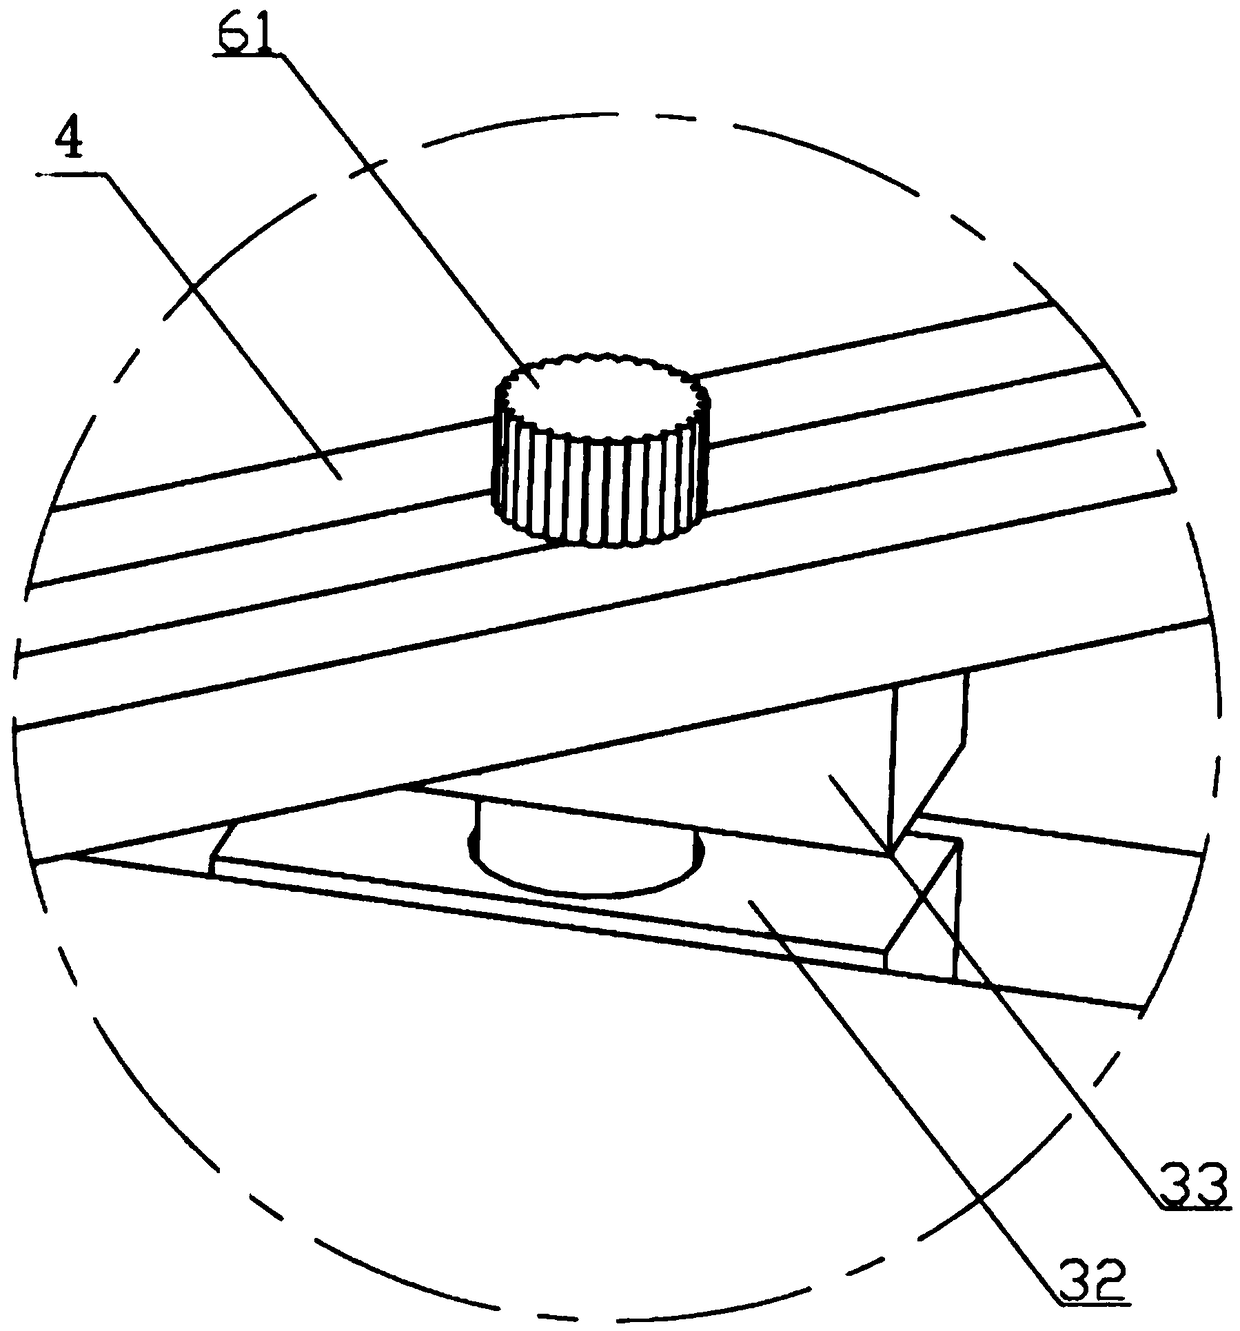 Cutting device used for cutting oval glass